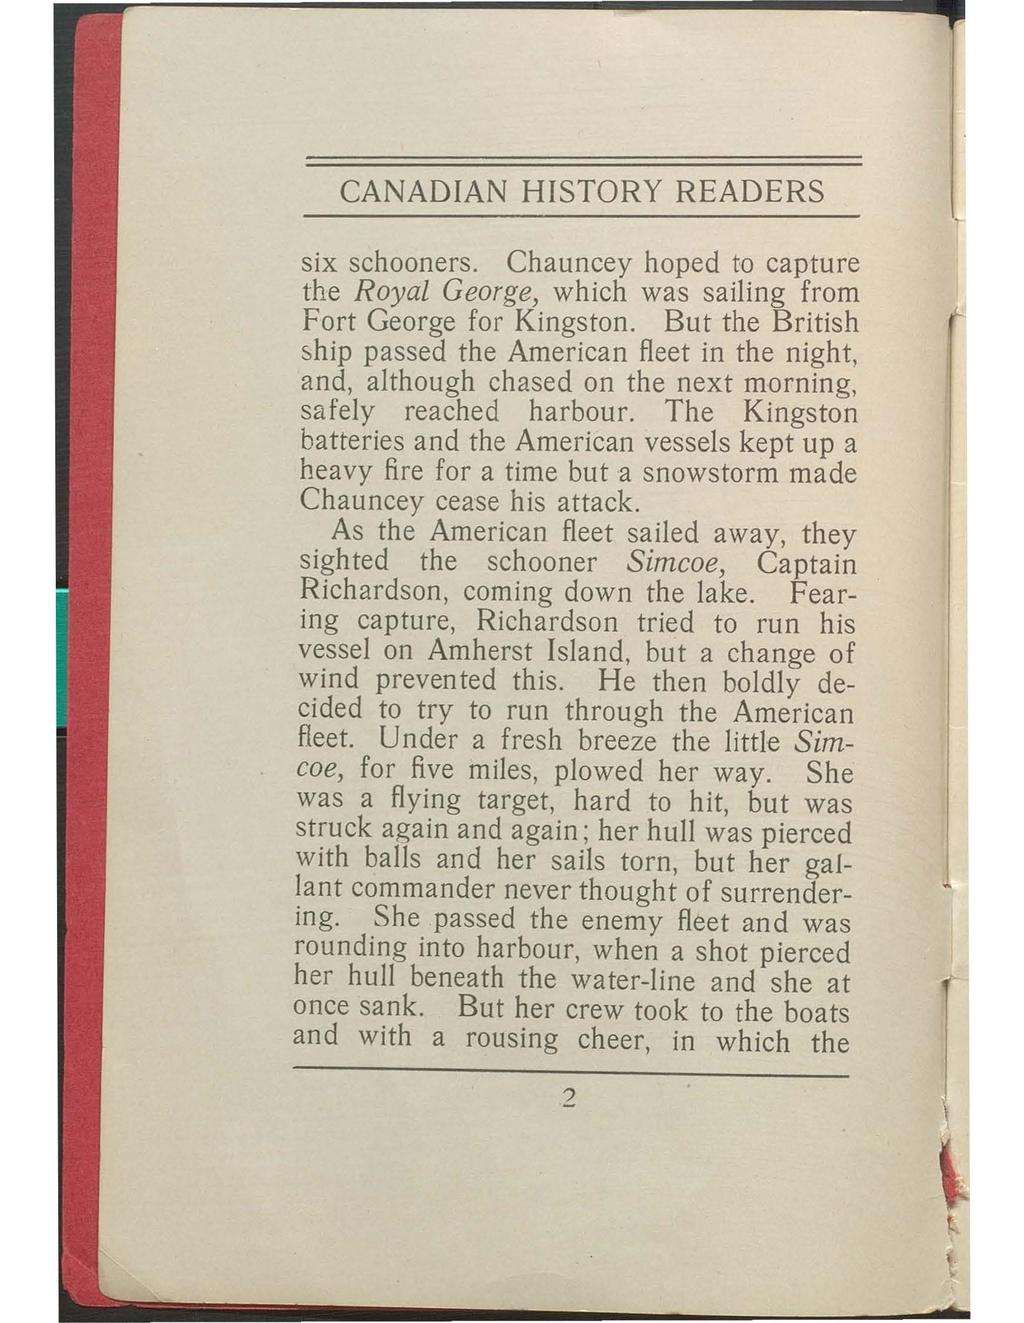 CANADIAN HISTORY READERS six schooners. Chauncey hoped to capture the Royal George, which was sailing from Fort George for Kingston.